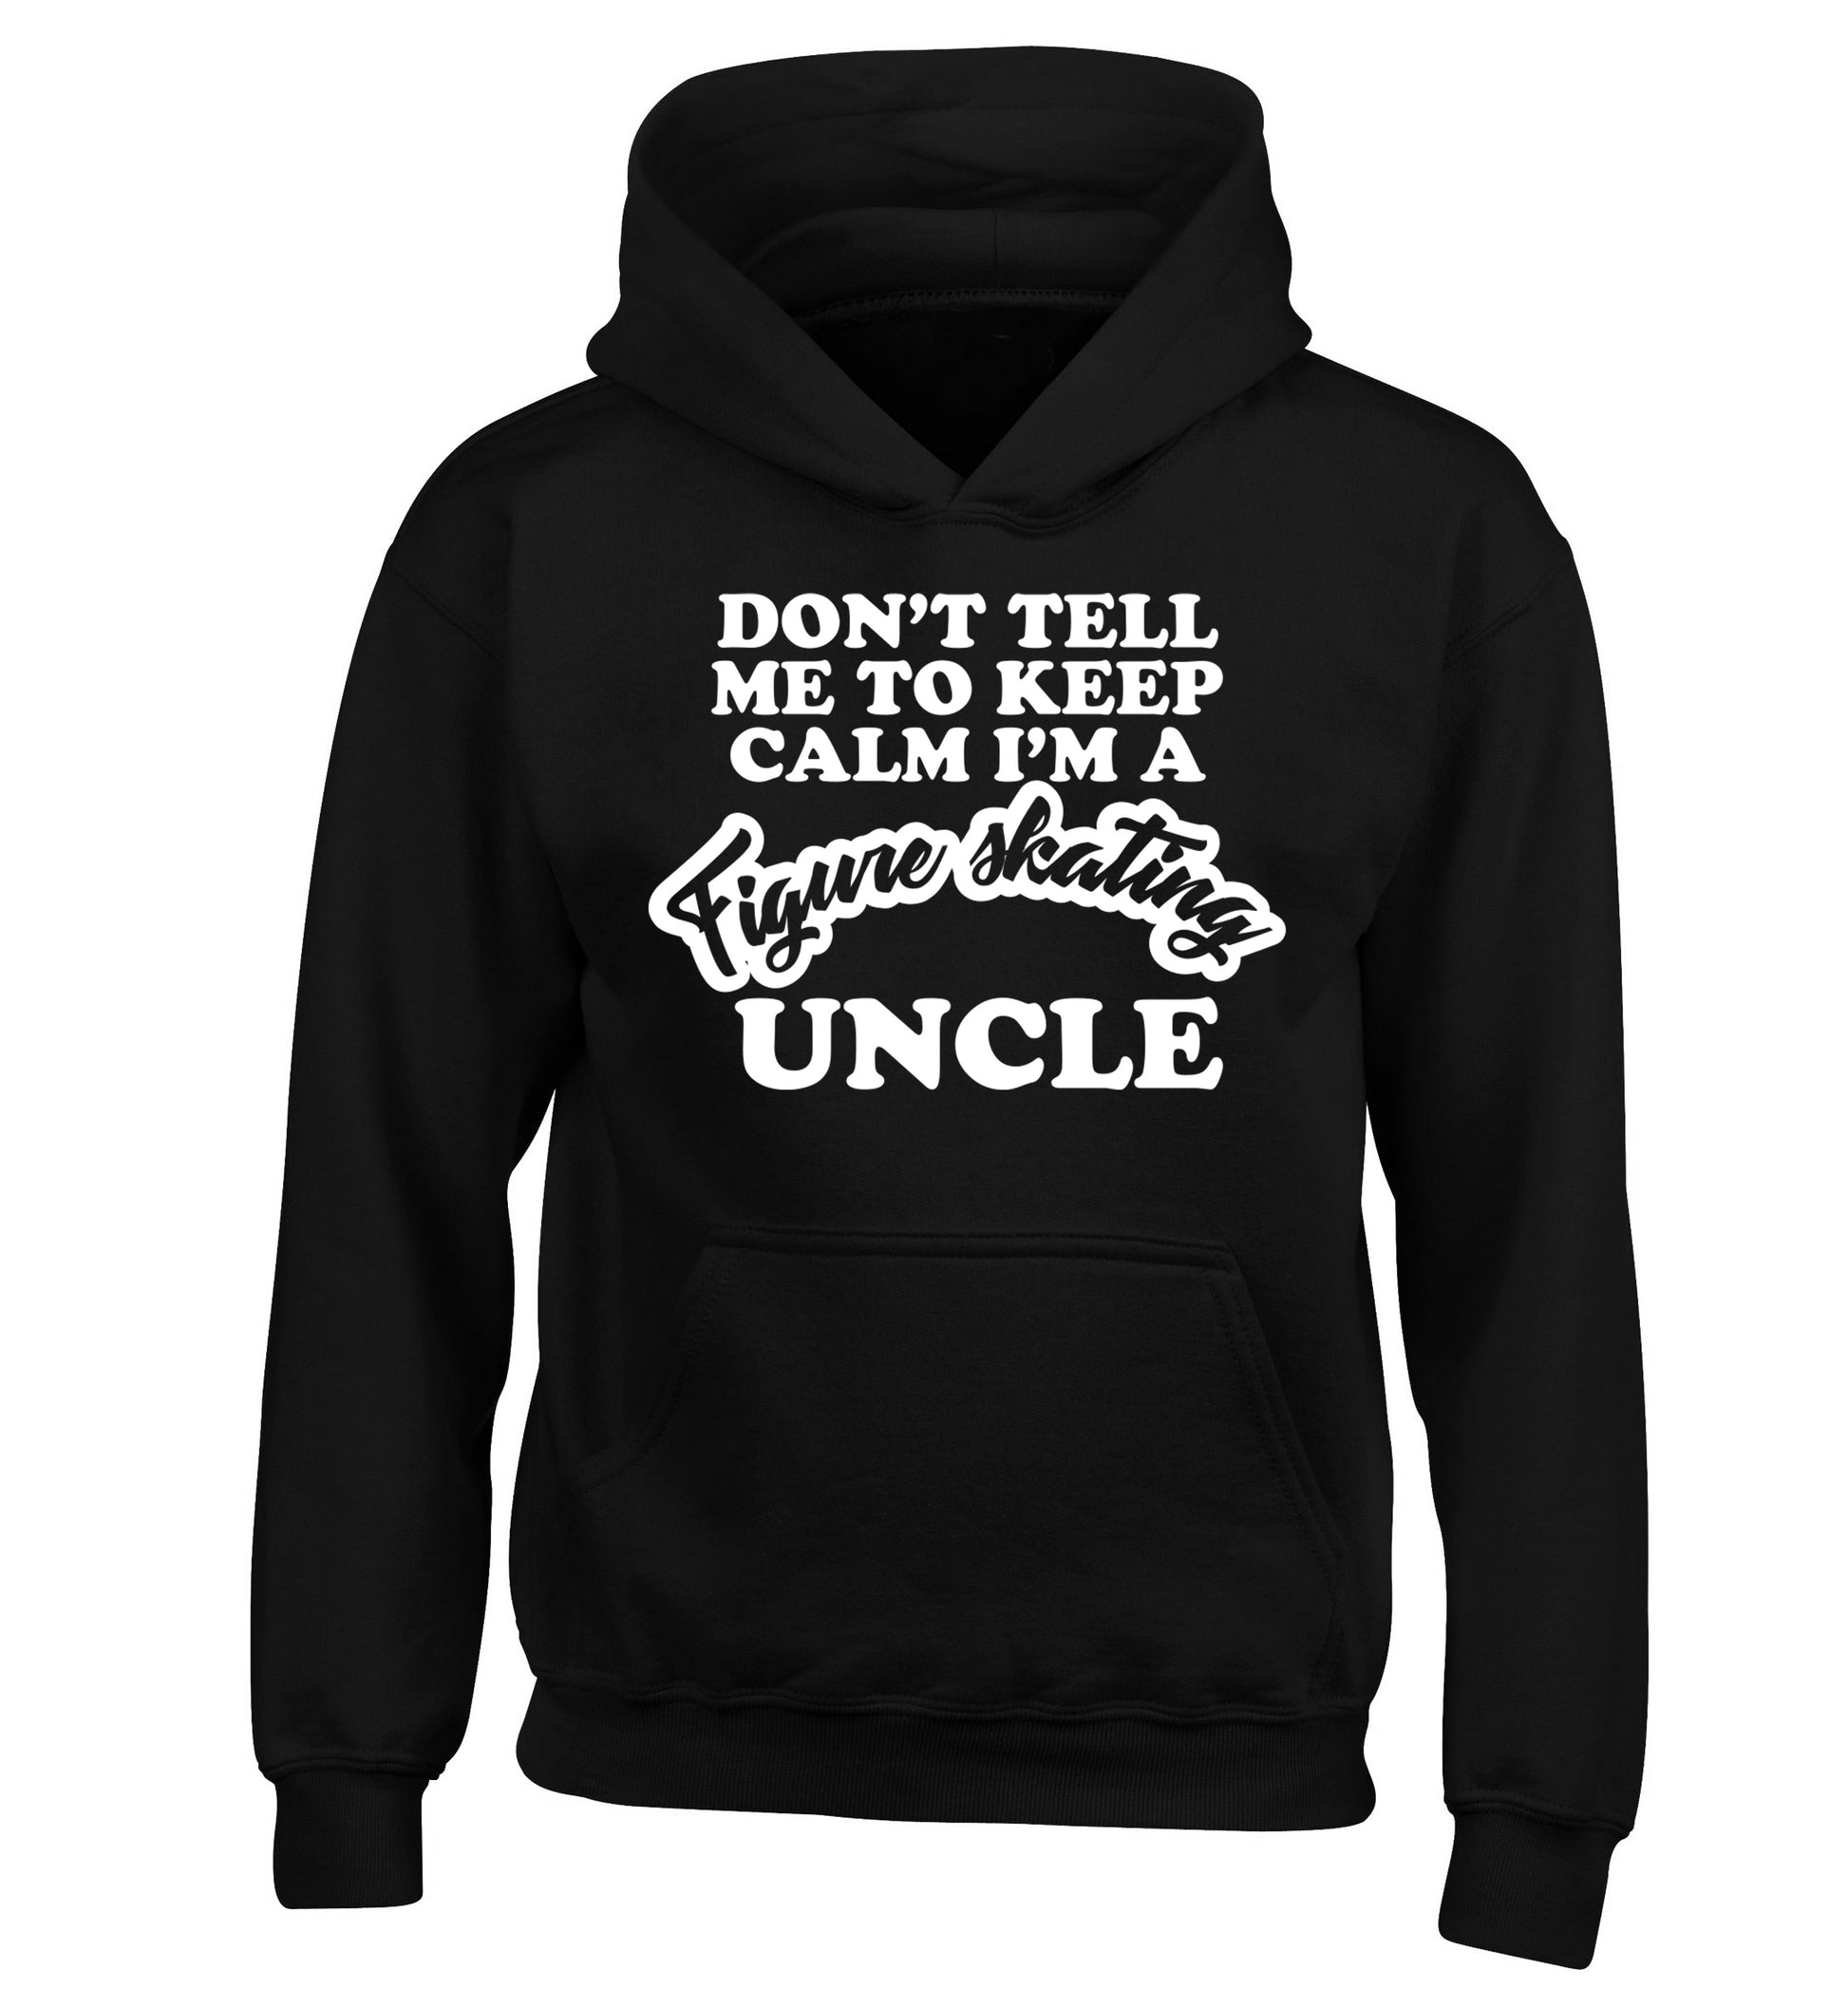 Don't tell me to keep calm I'm a figure skating uncle children's black hoodie 12-14 Years